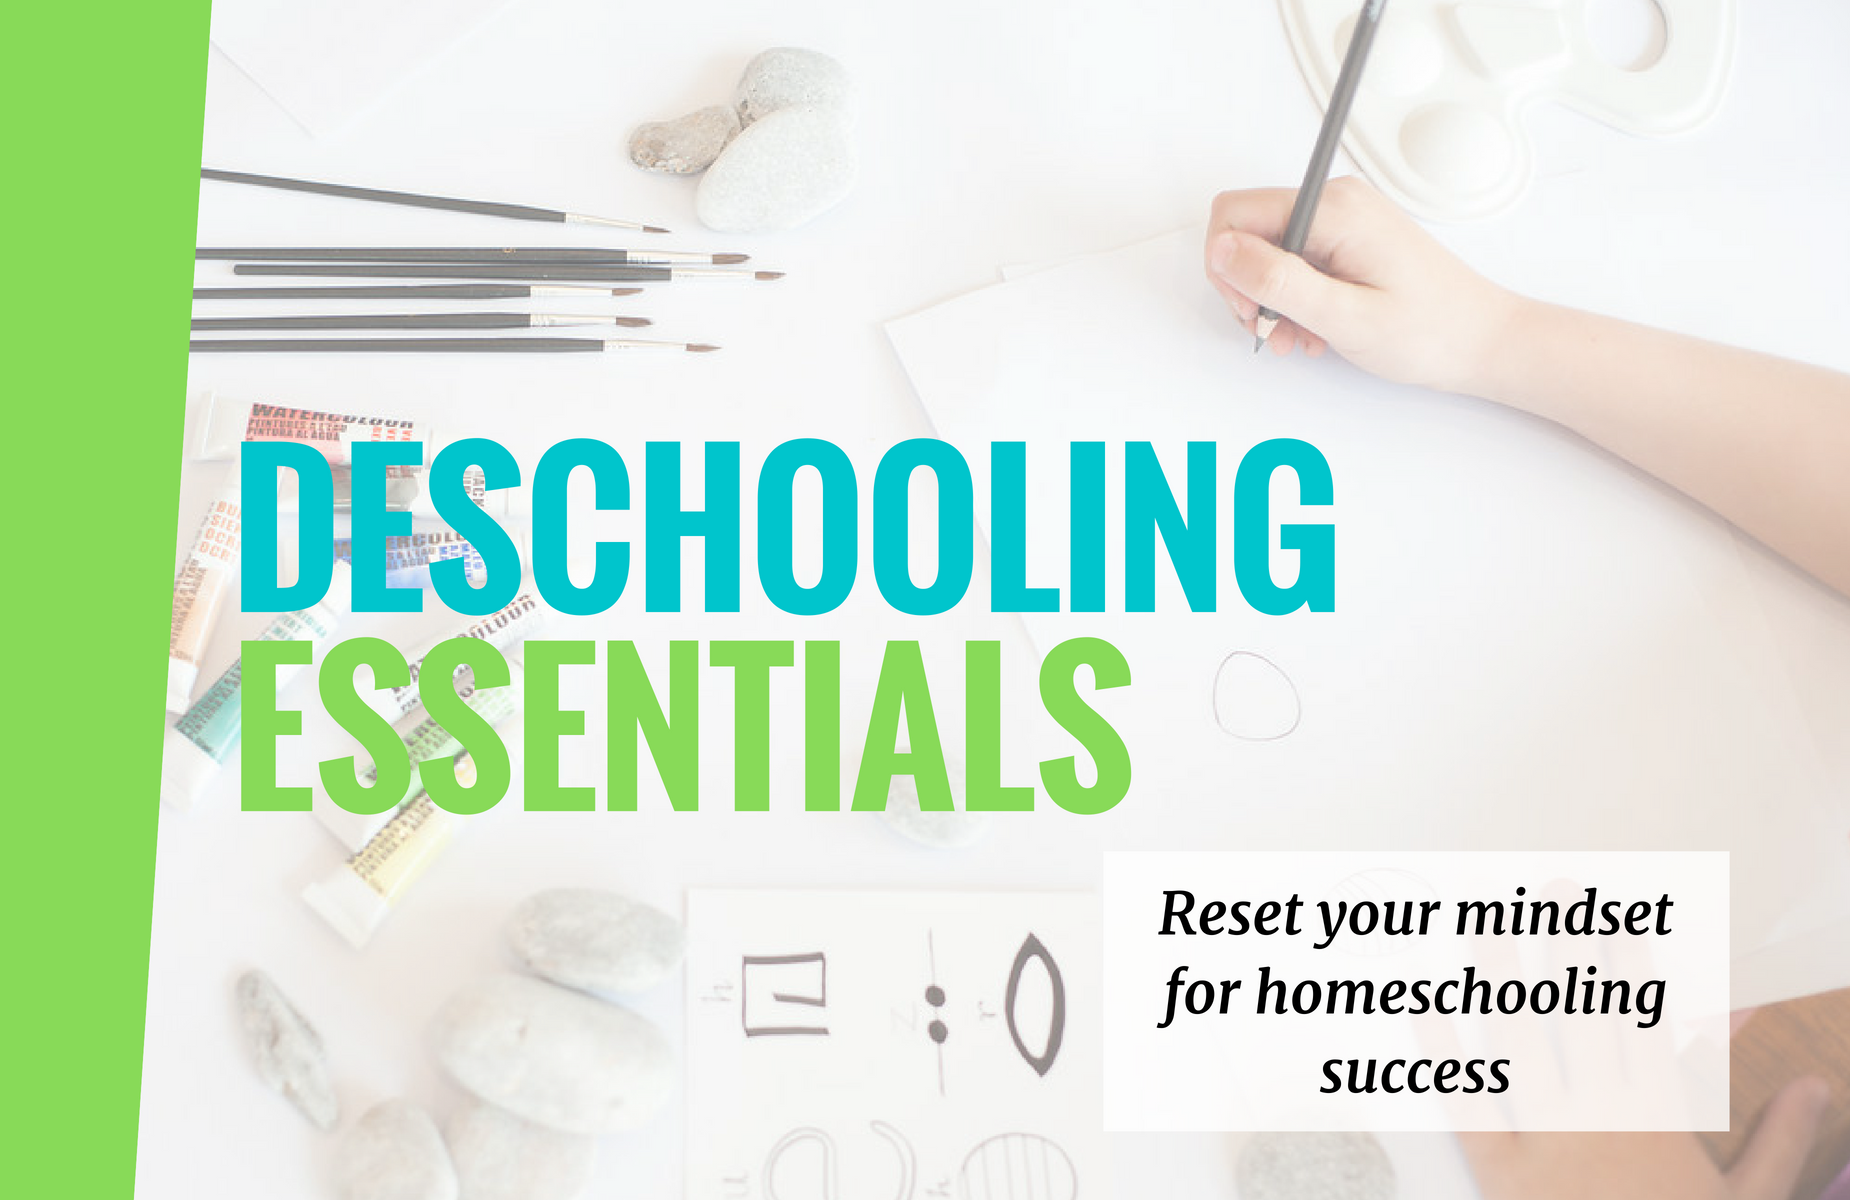 child's hand drawing with black colored pencil, with brushes and watercolors nearby, with text overlay, "Deschooling Essentials - Reset your mindset for homeschooling success"